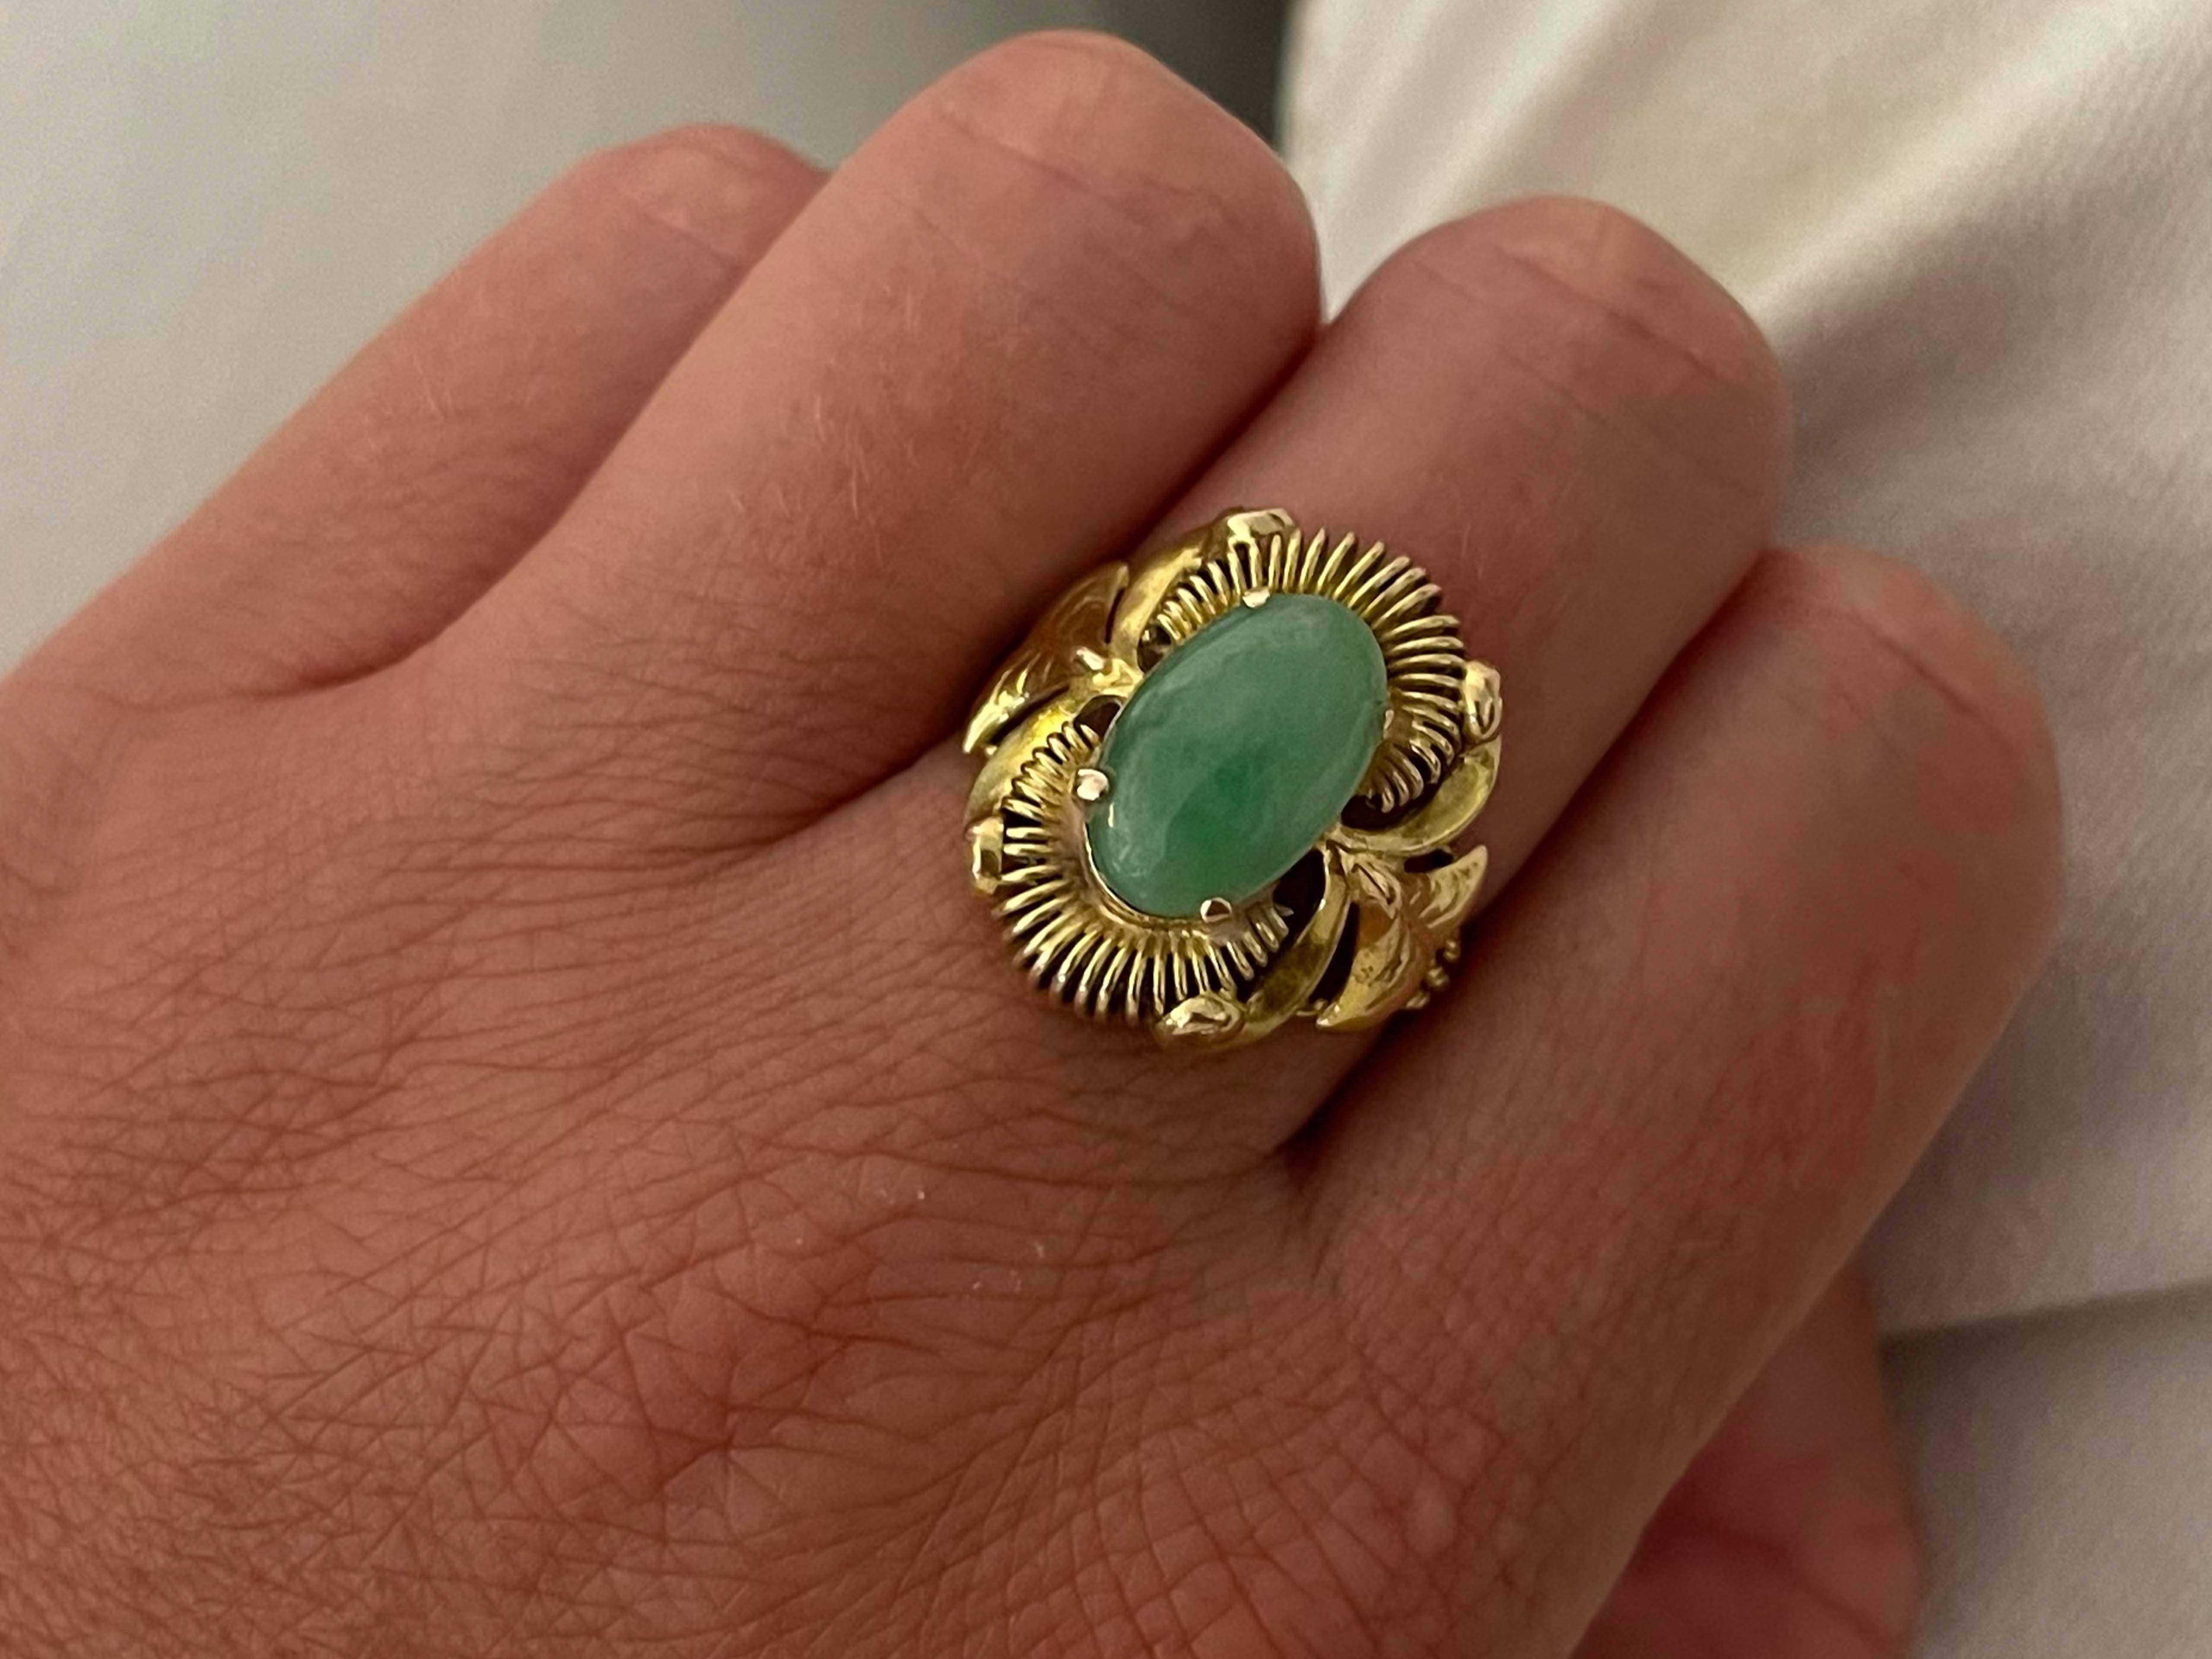 Item Specifications:

Metal: 14K Yellow Gold 

Style: Statement Ring

Ring Size: 7.25 (resizing available for a fee)

Total Weight: 5.6 Grams

Gemstone Specifications:

Center Gemstone: Jade

Shape: Oval

Color: Green

Cut: Cabochon 

Jade Carat